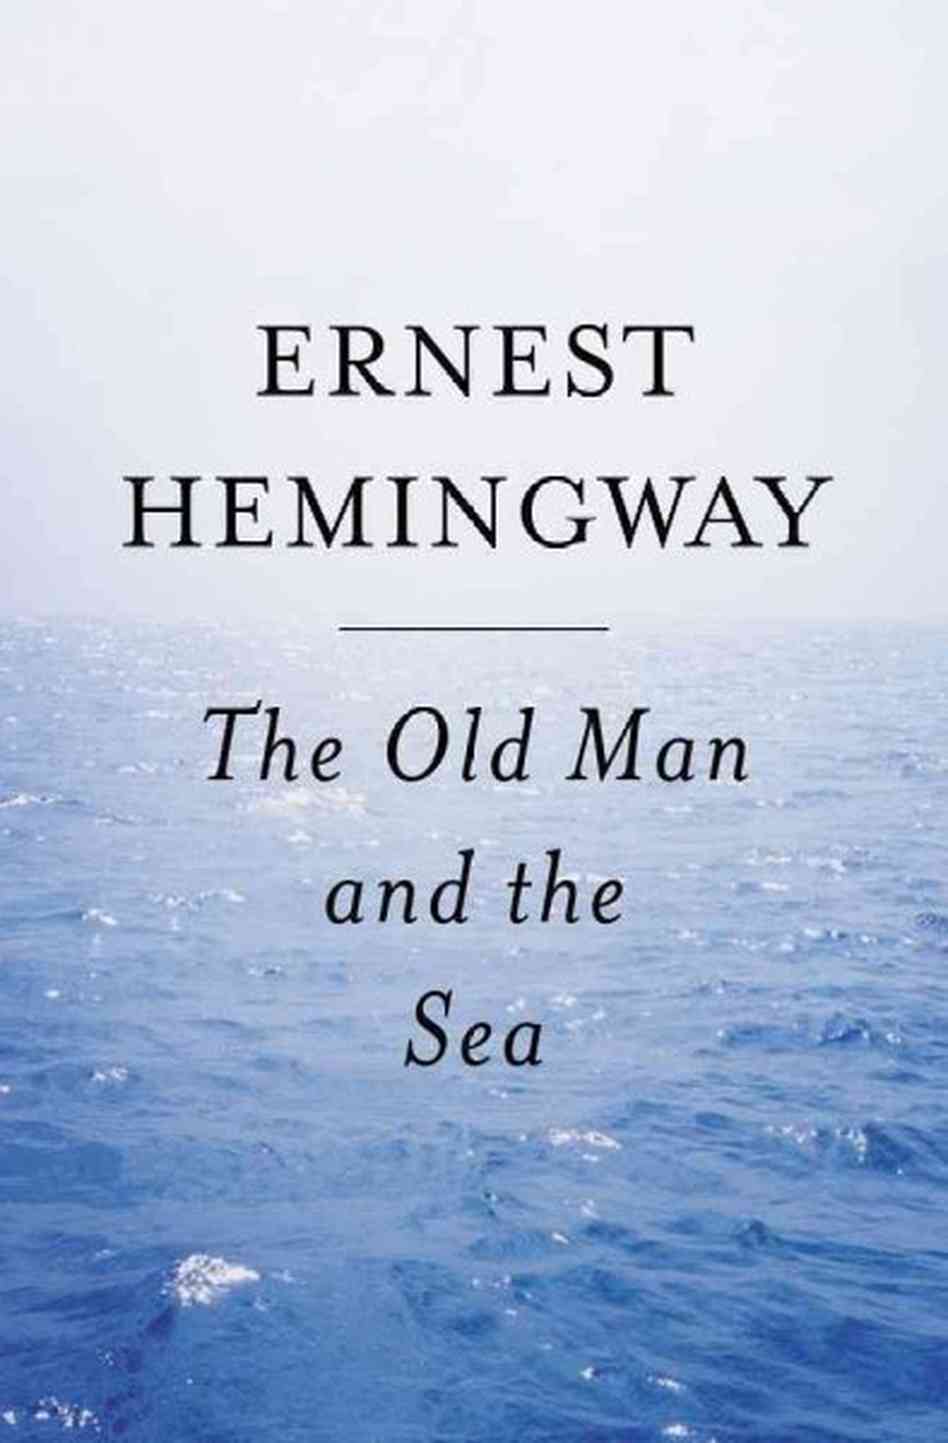 The Old Man and the Sea | Ernest Hemingway | 1st Edition